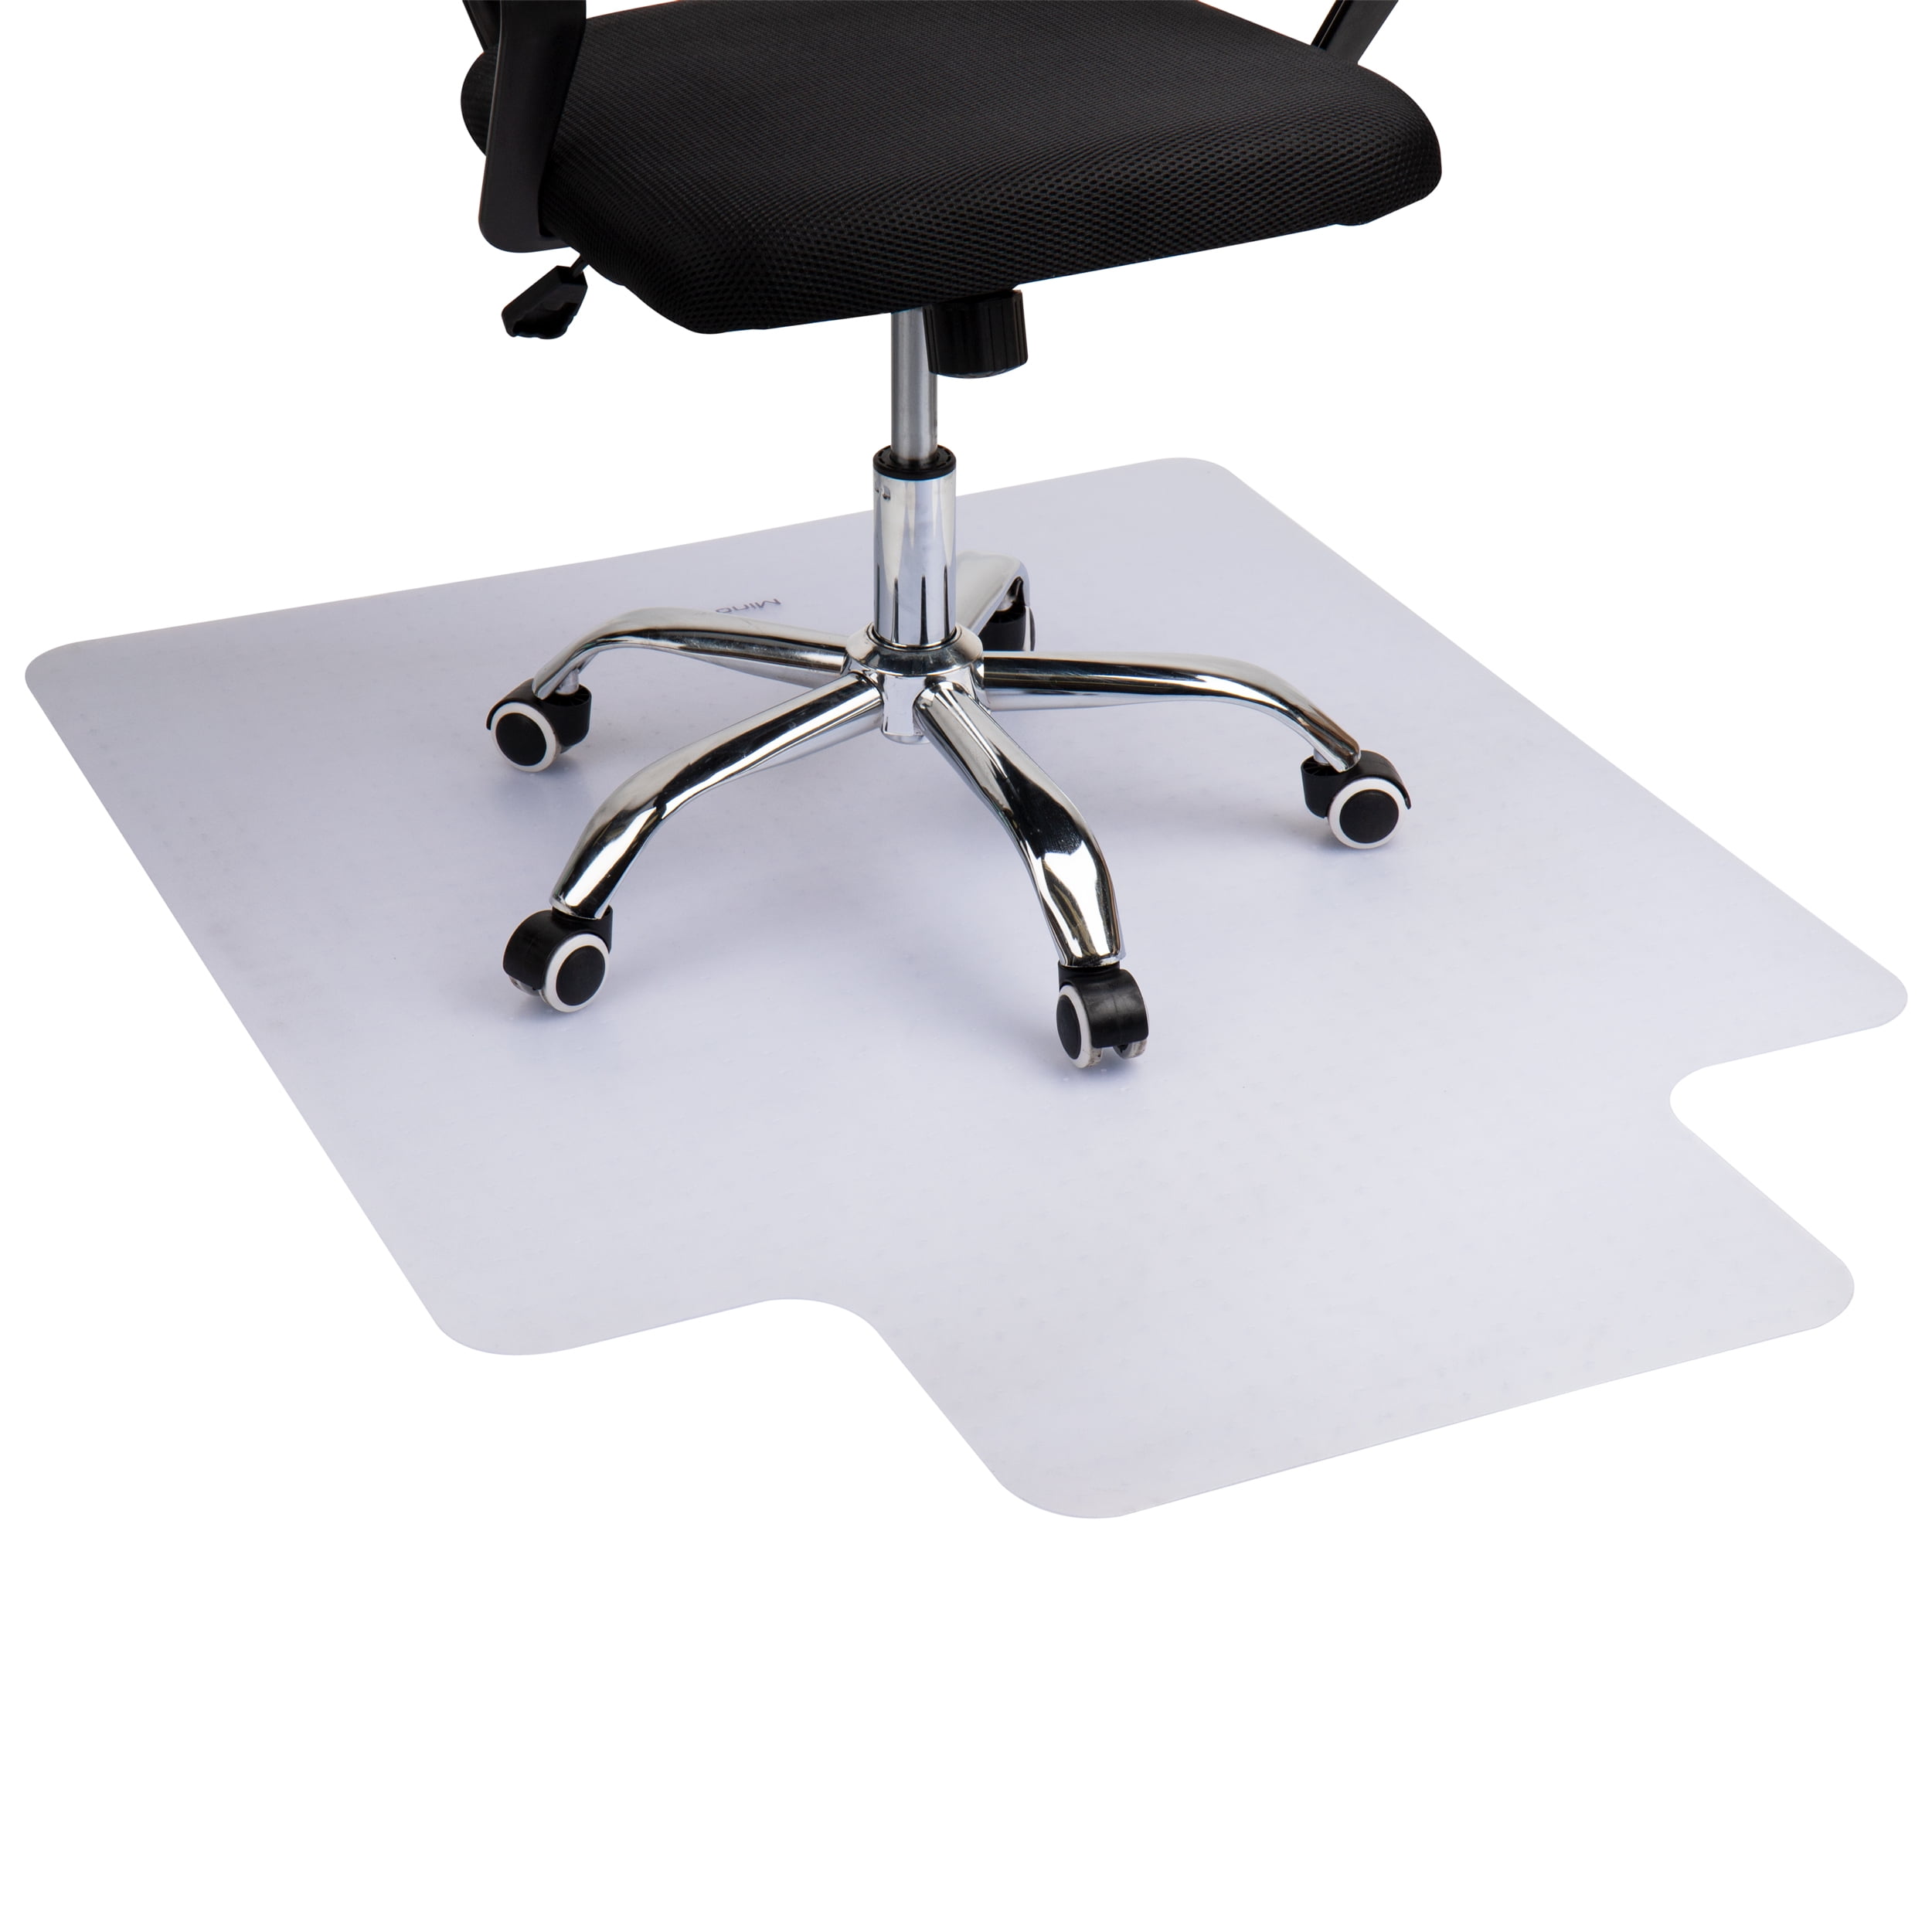 Mind Reader Office Chair Mat 36 X 48 Inches Clear A1a557a1 E97b 4f13 B2ba 1cc830e8da7b.02215baa948f619f0b2f0695b6fe80b9 